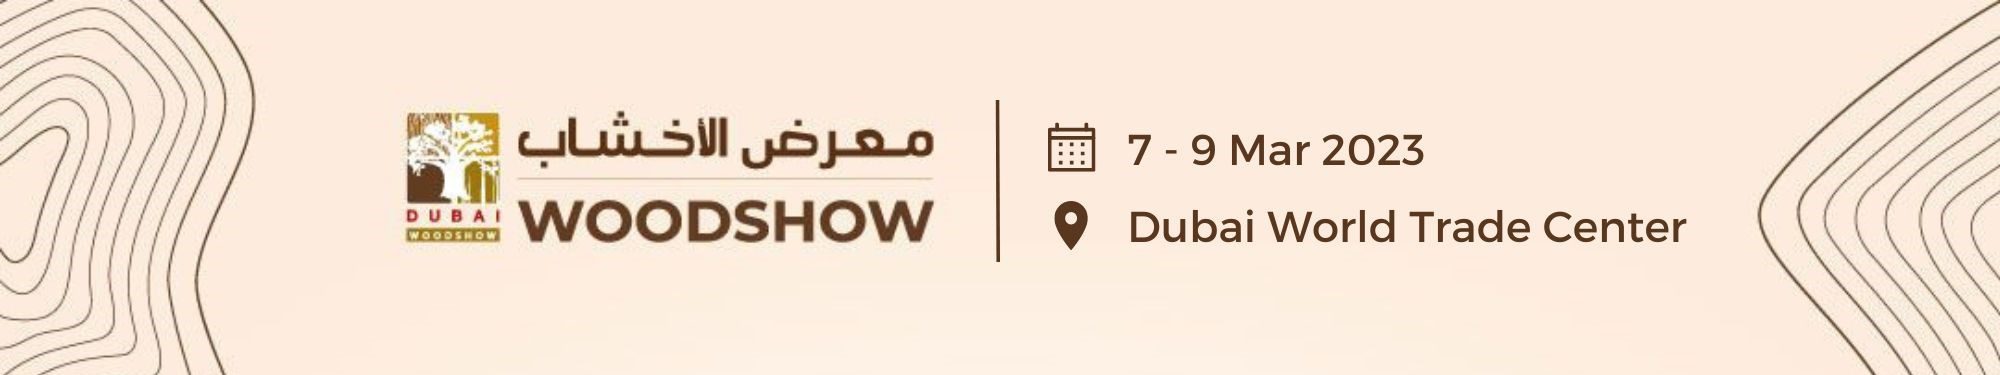 The Dubai Wood Show returns in March and Mobiliário em Notícia will be following all the details!